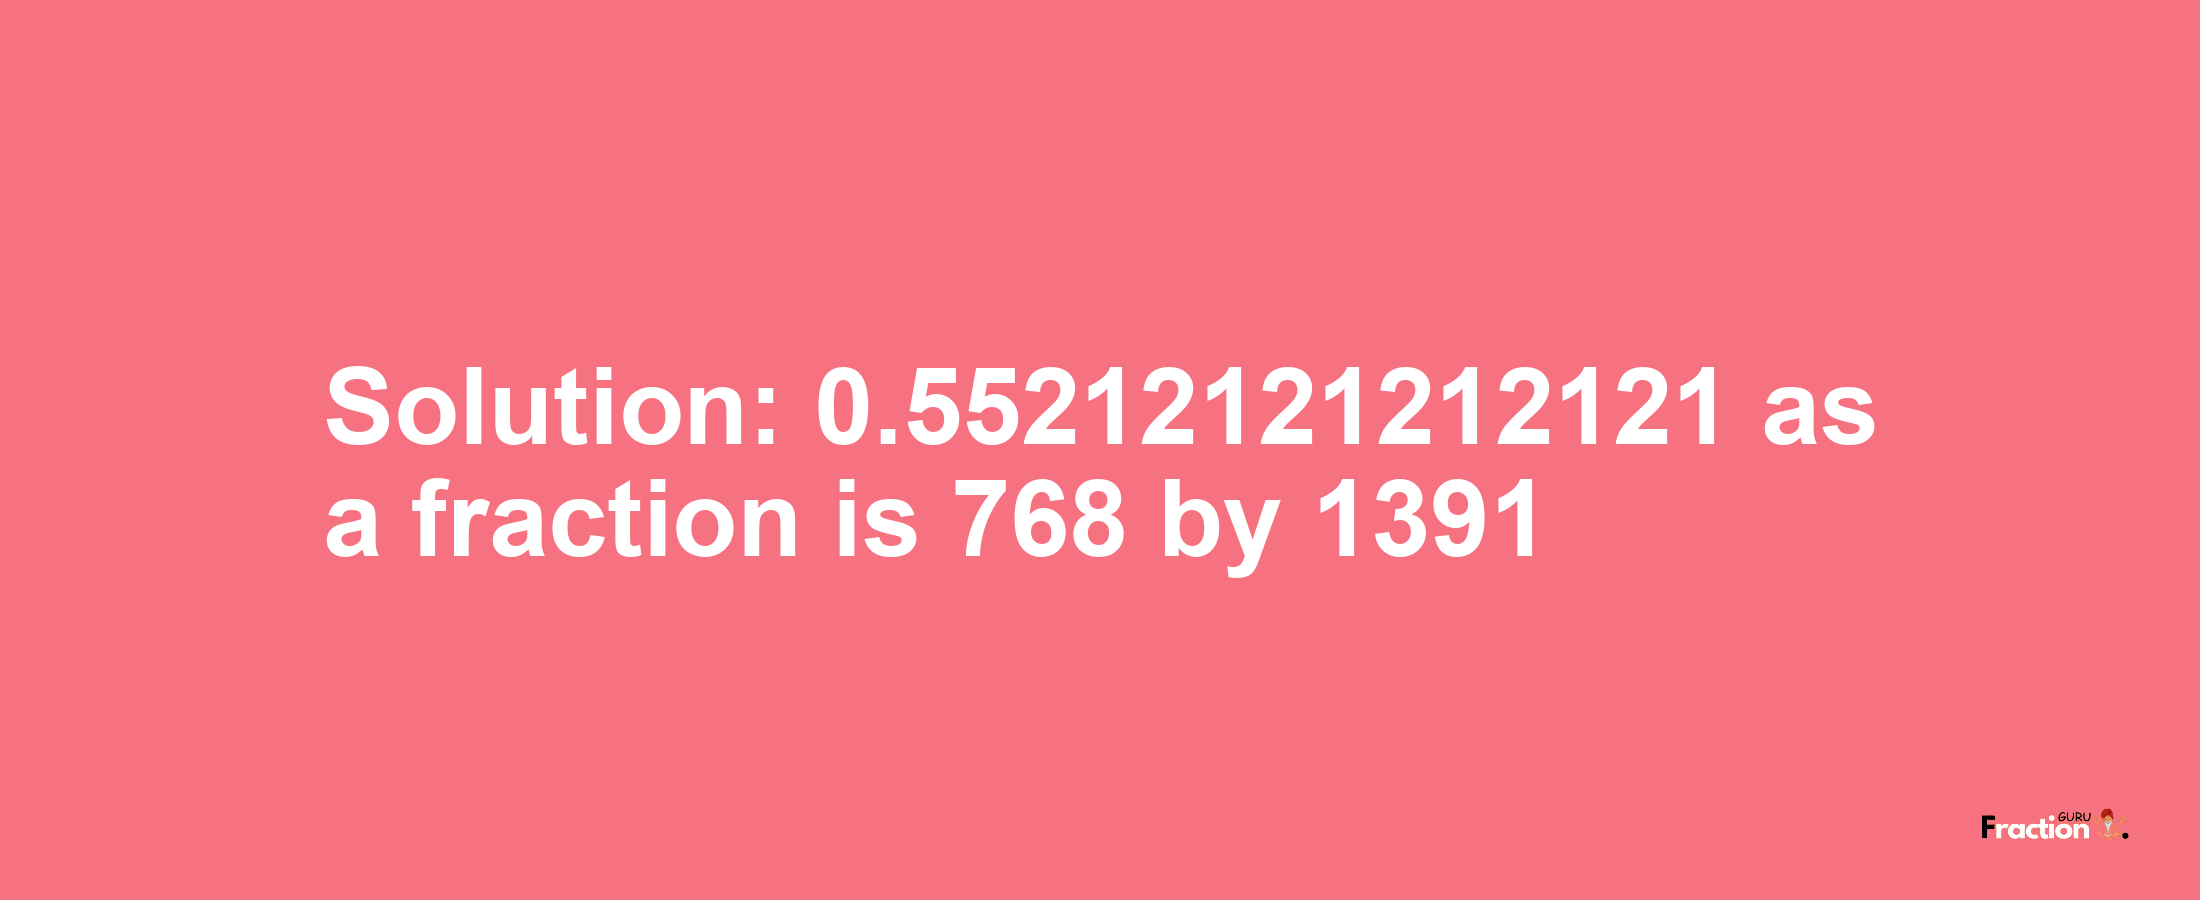 Solution:0.55212121212121 as a fraction is 768/1391